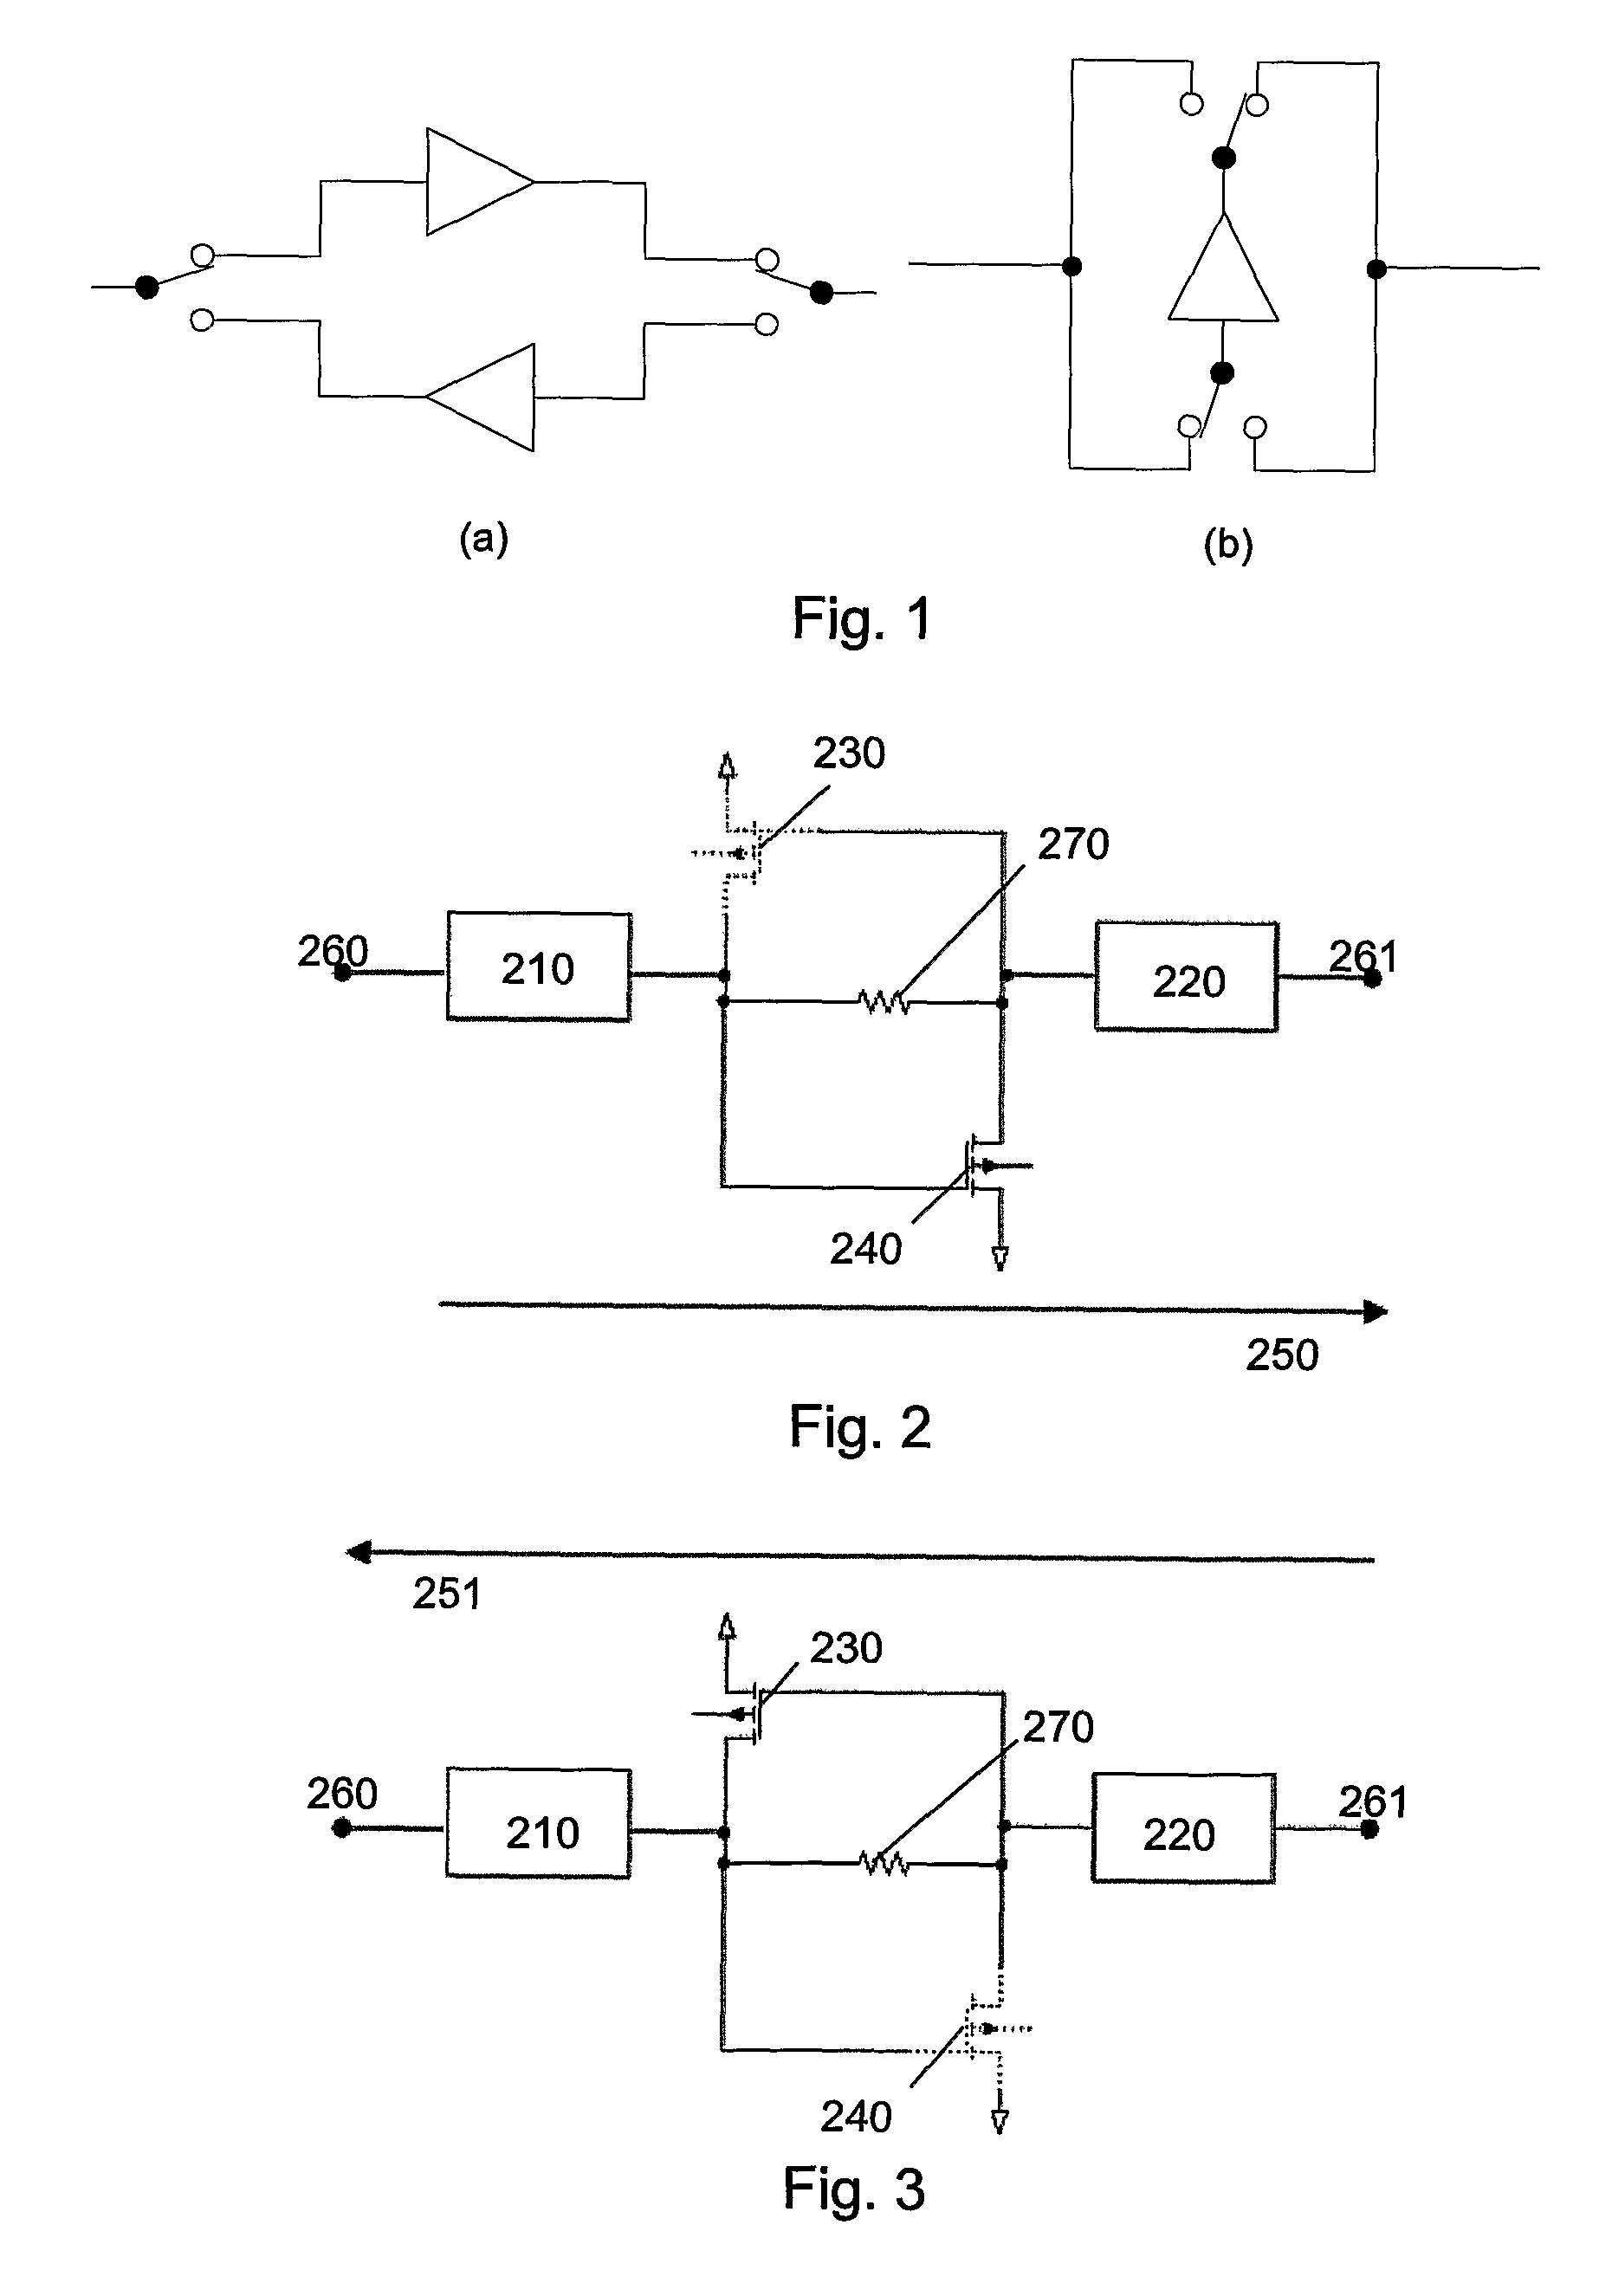 Switch-less bidirectional amplifier